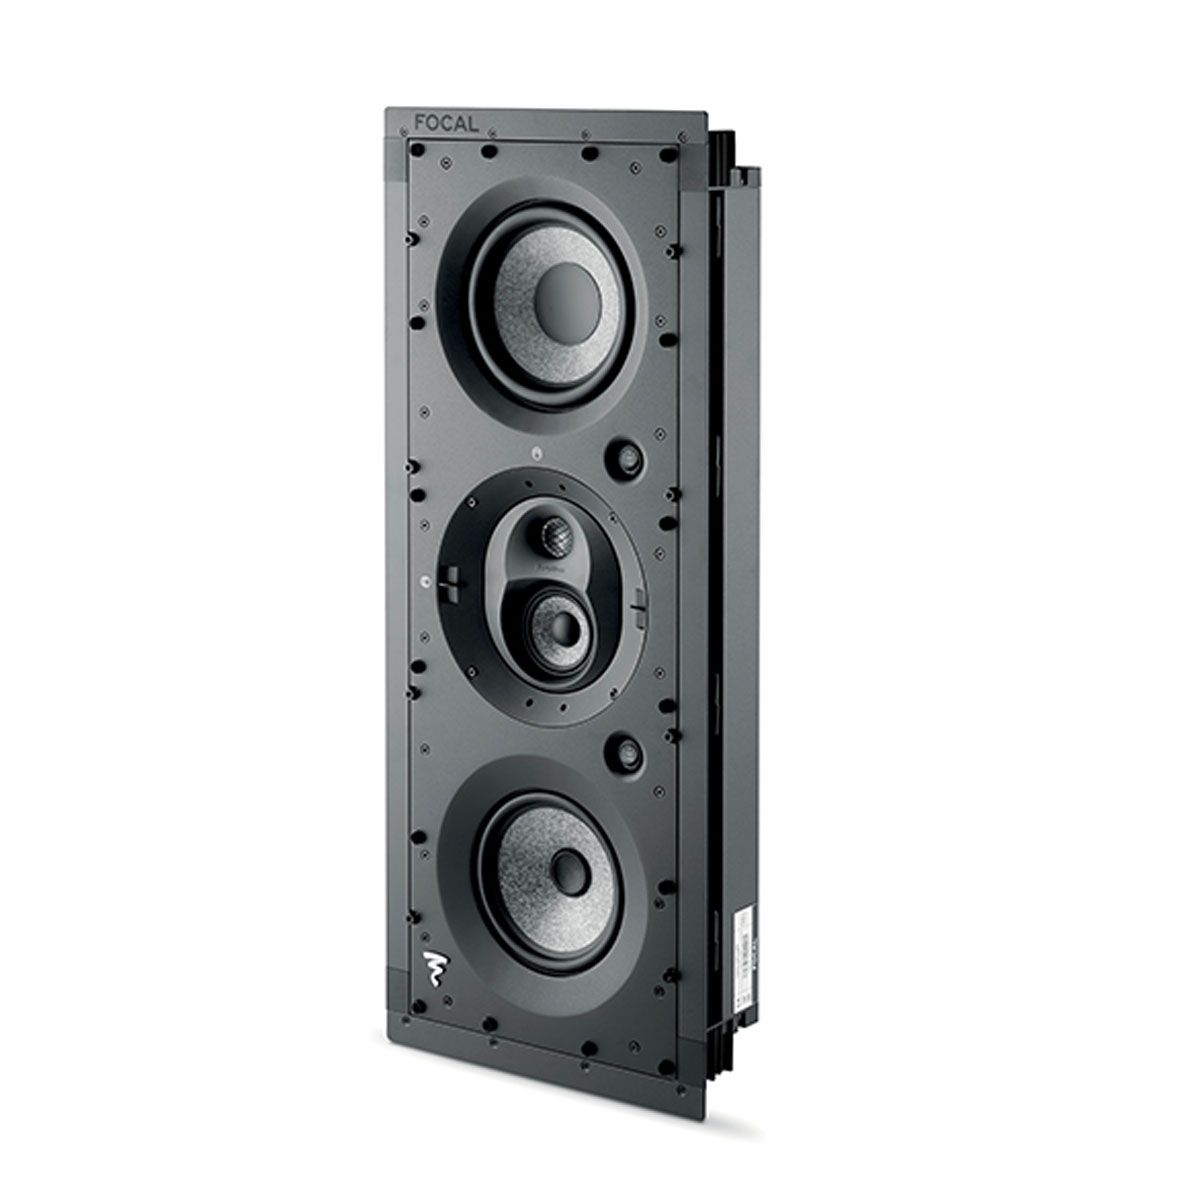 Focal 1000 IWLCR6 In-Wall Loudspeaker angled front view without grille